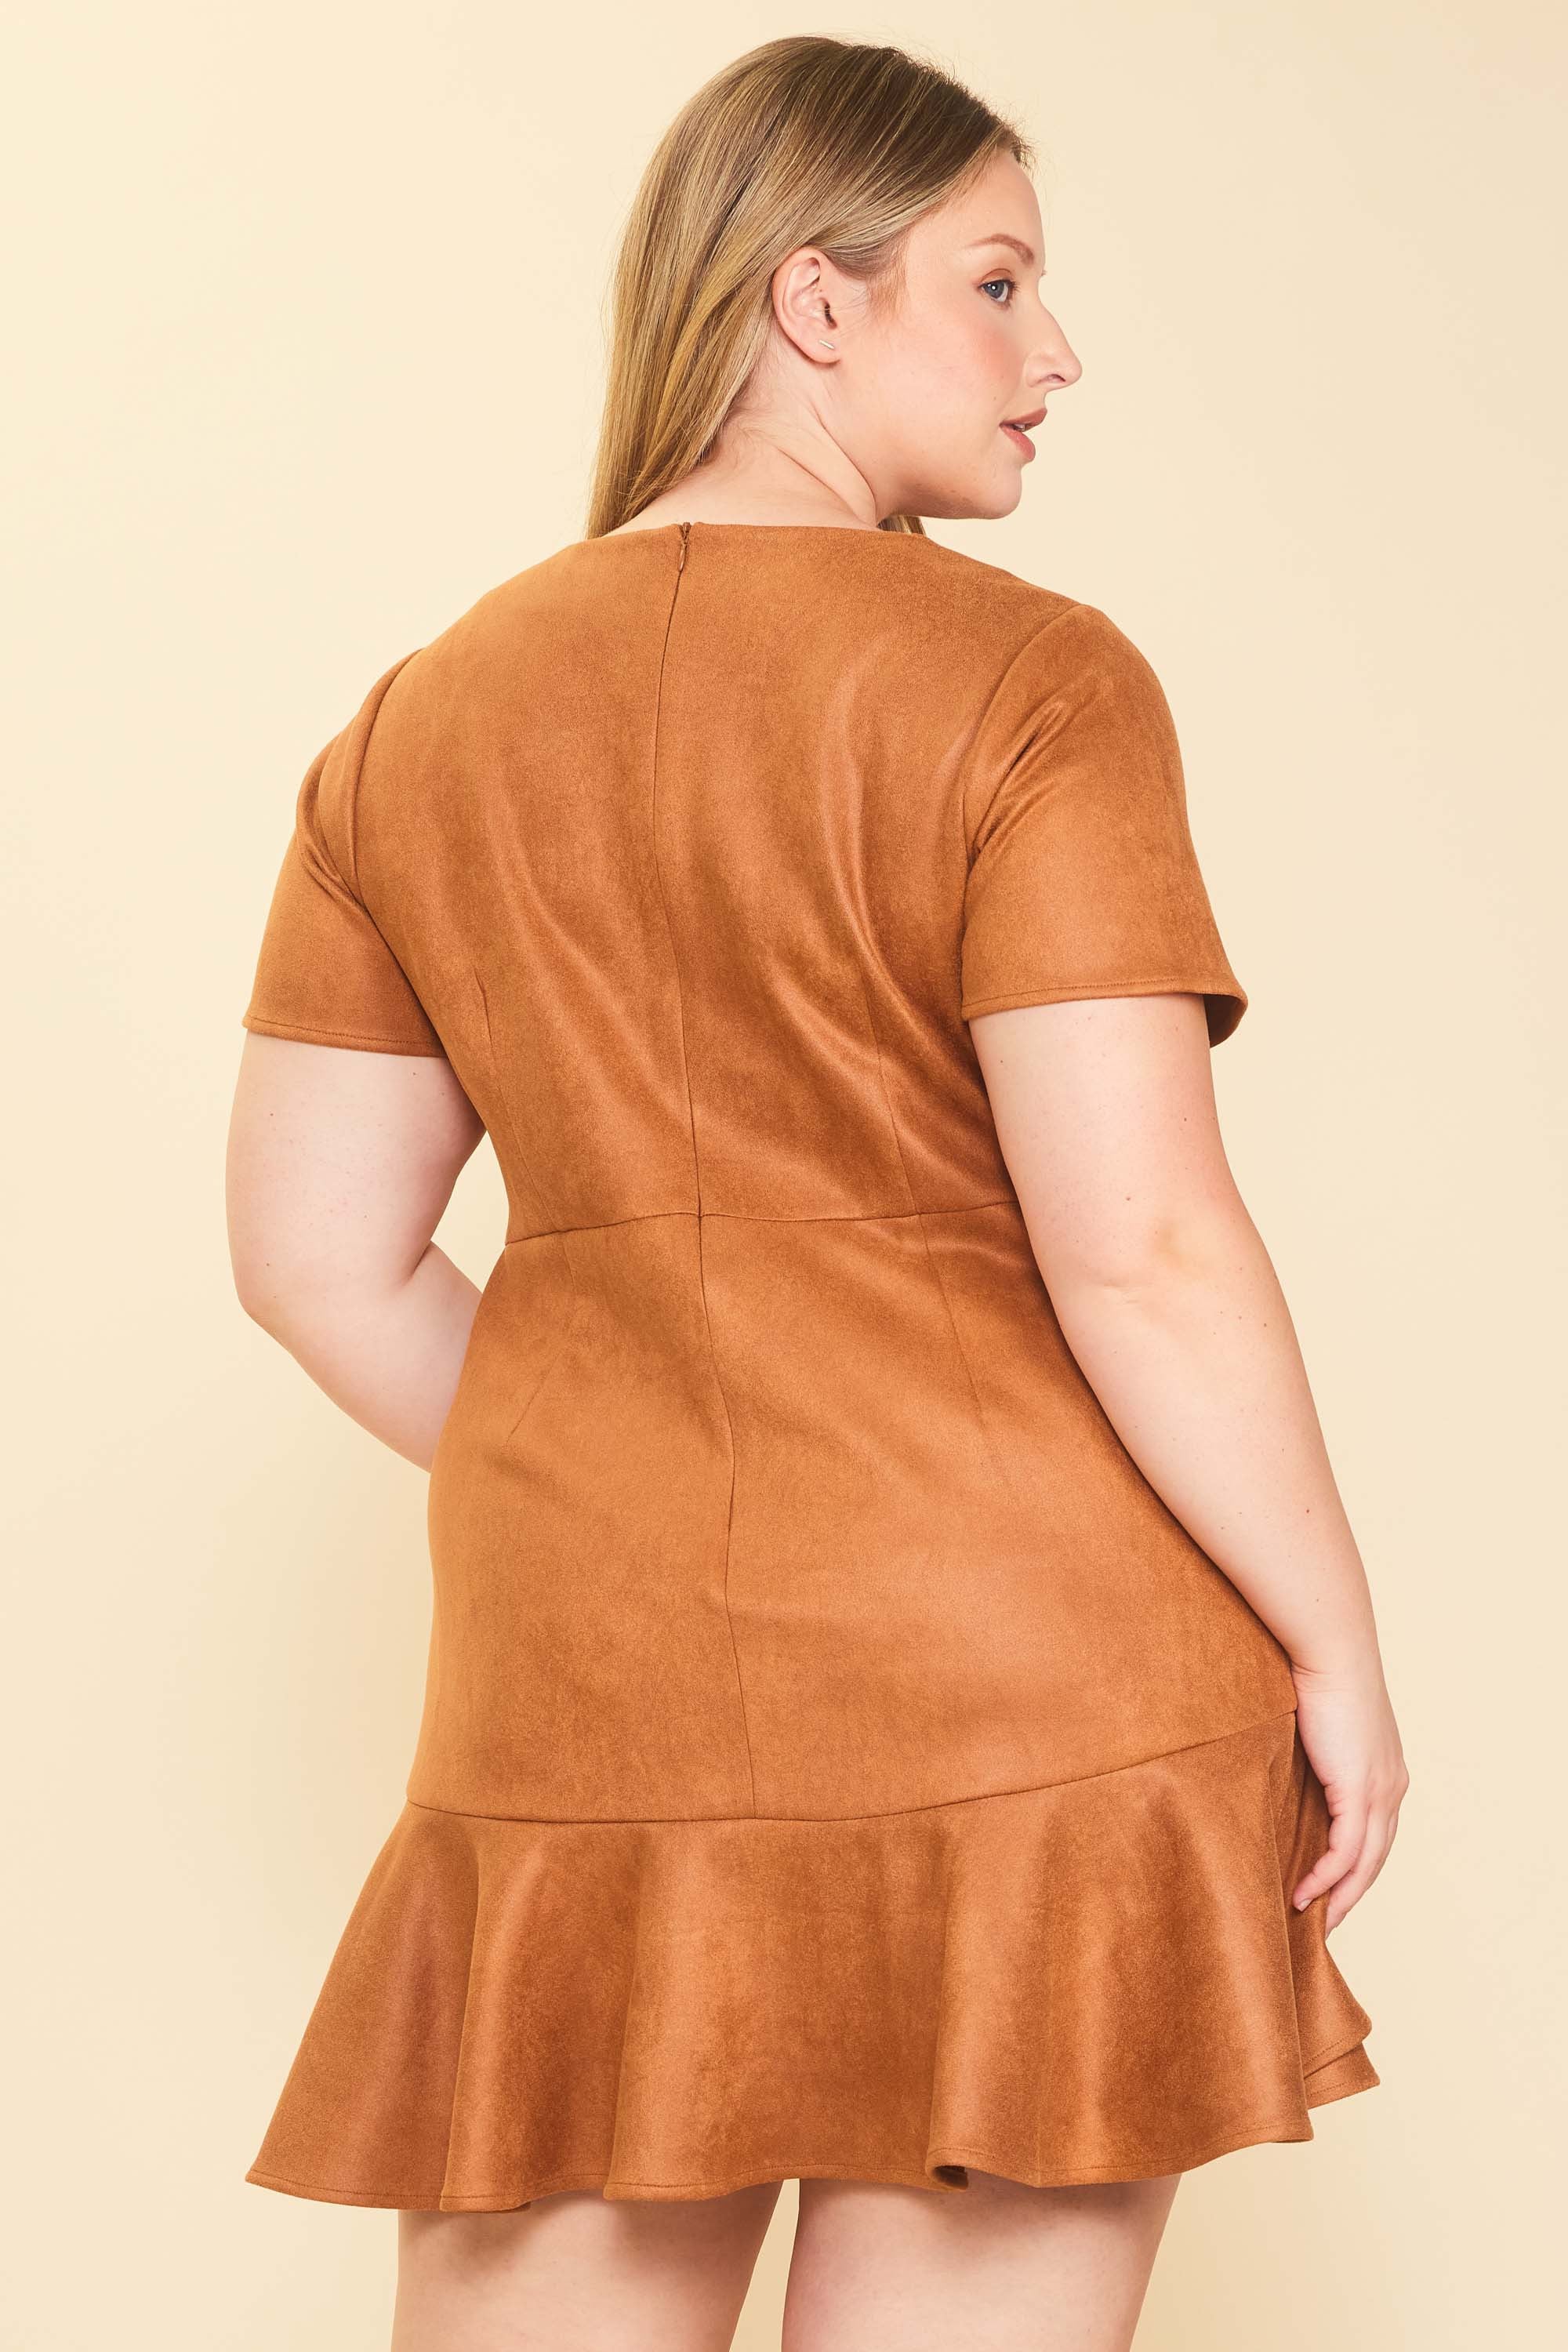 Skies Are Blue Sadie Faux Suede Dress - Camel, short sleeve, round neck, tiered ruffle skirt, curvy